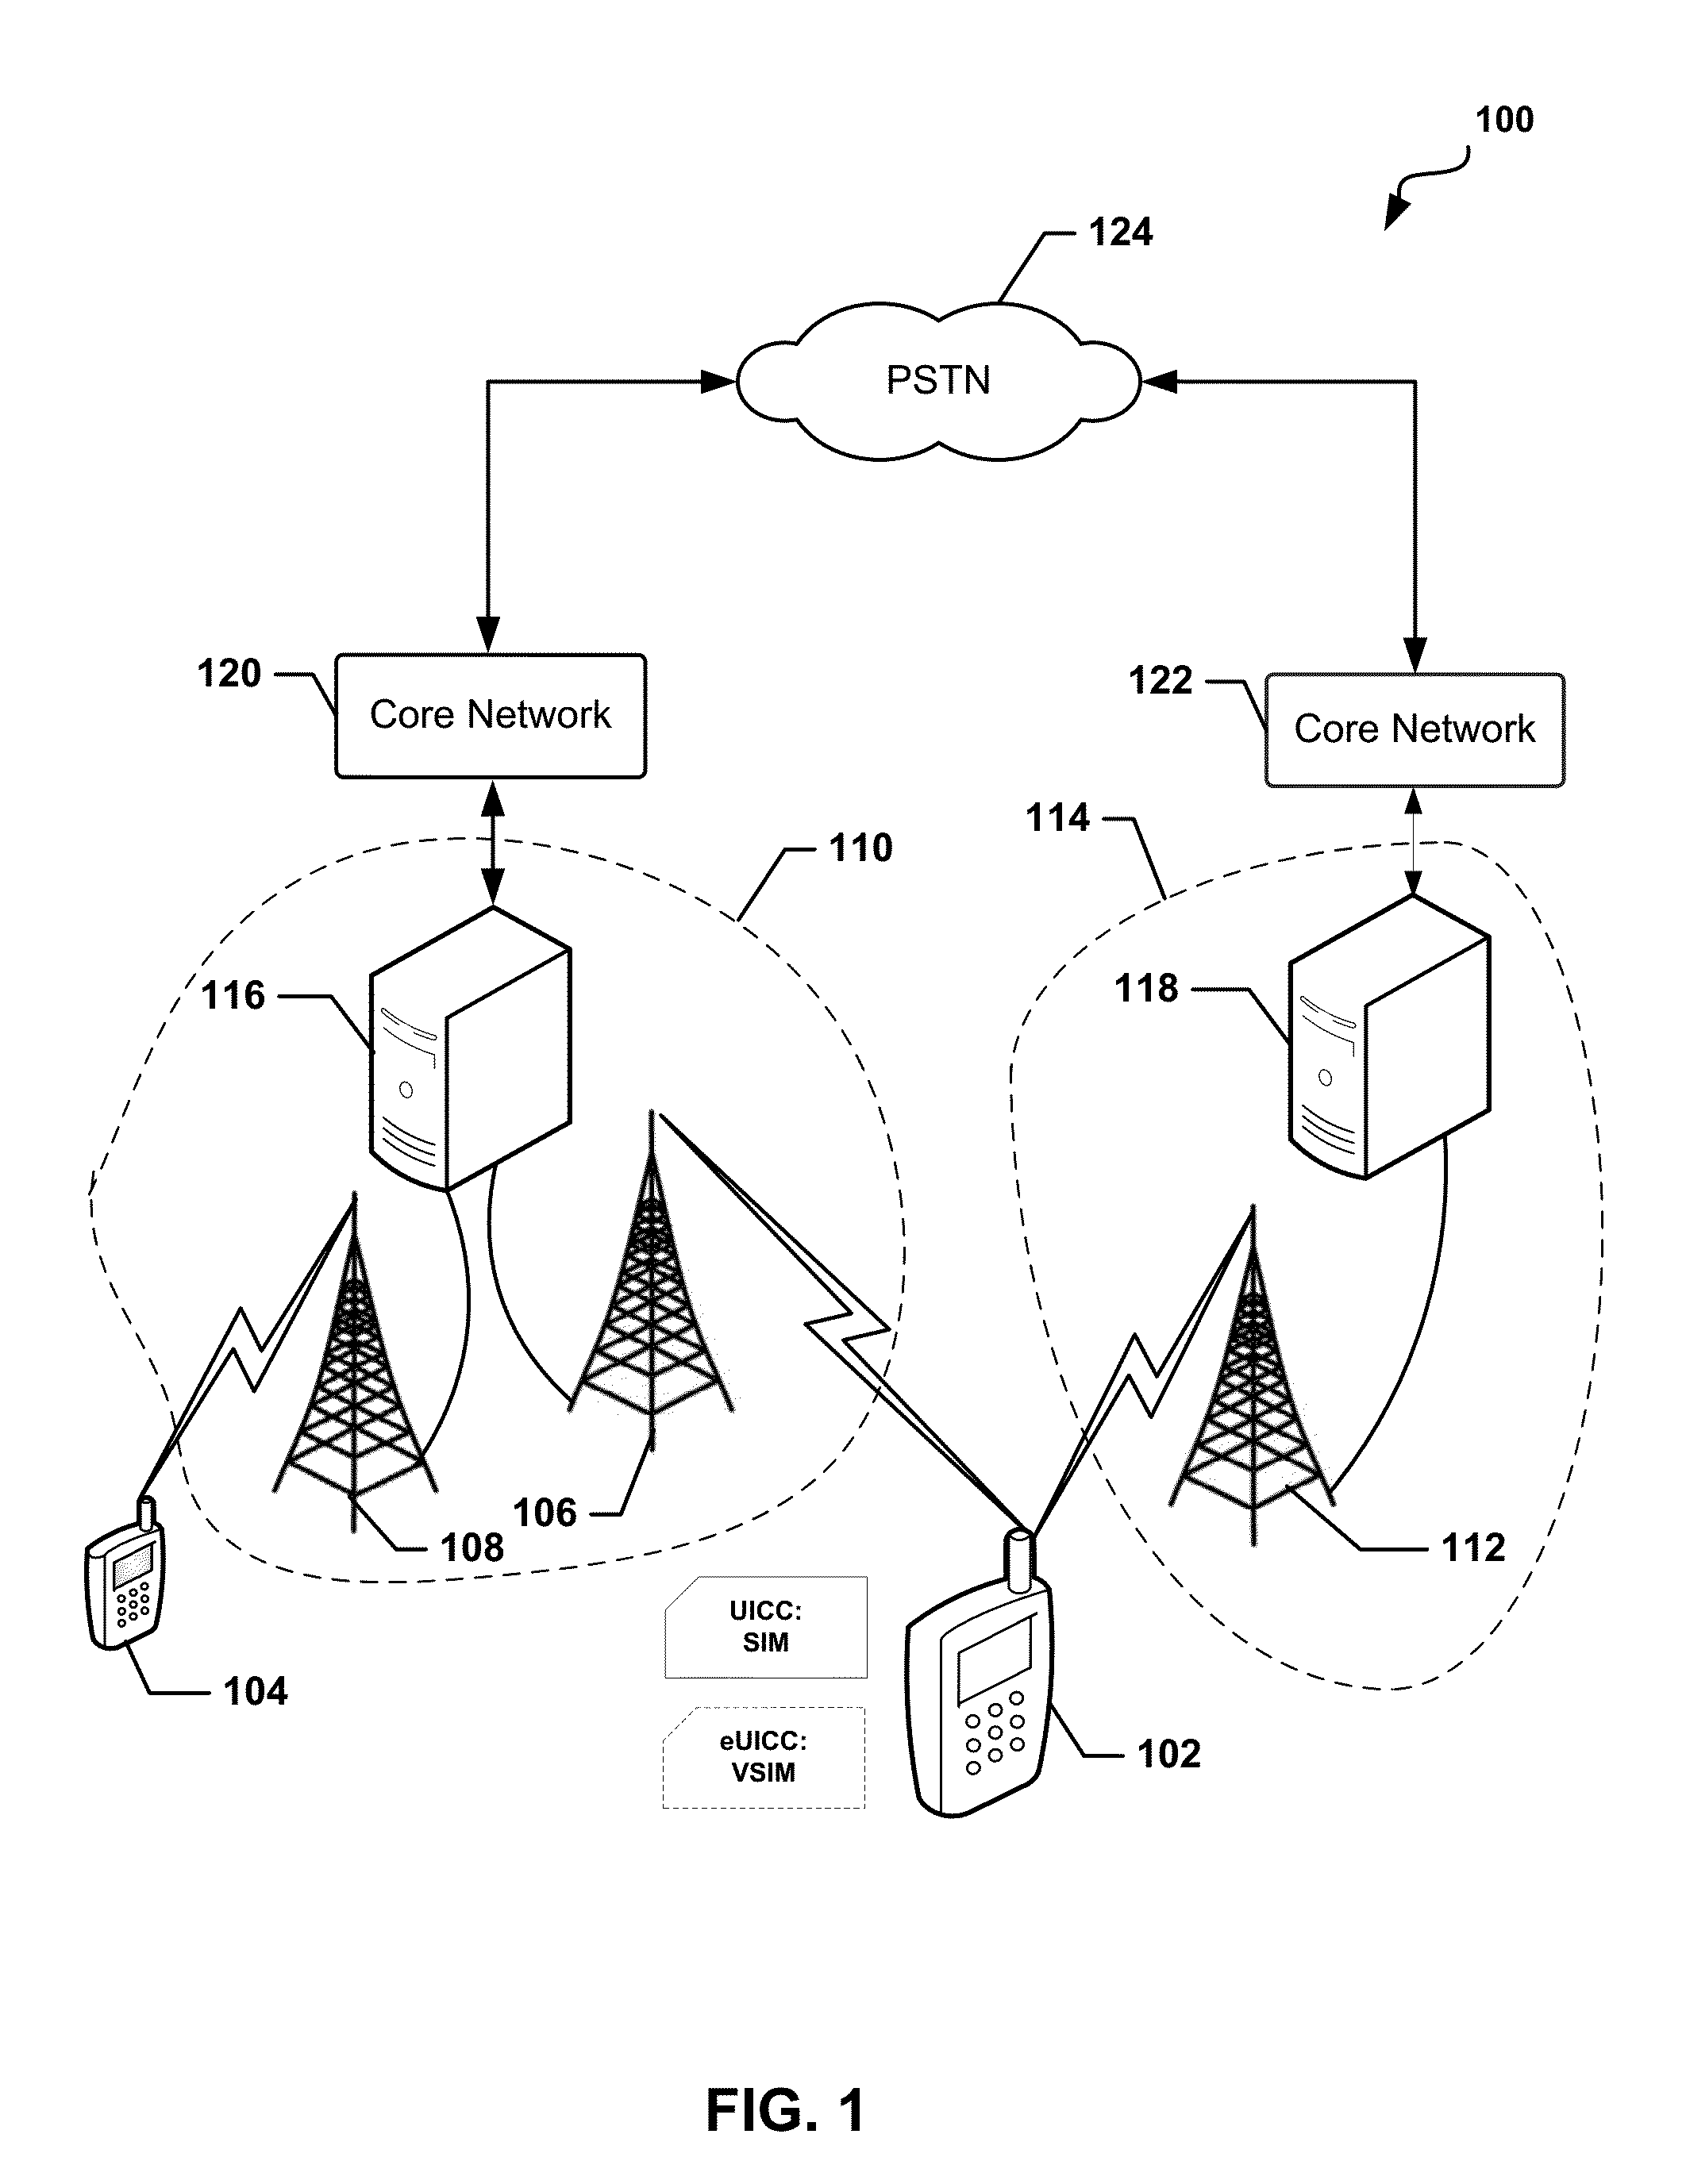 System and Methods for Dynamic SIM Provisioning on a Dual-SIM Wireless Communication Device